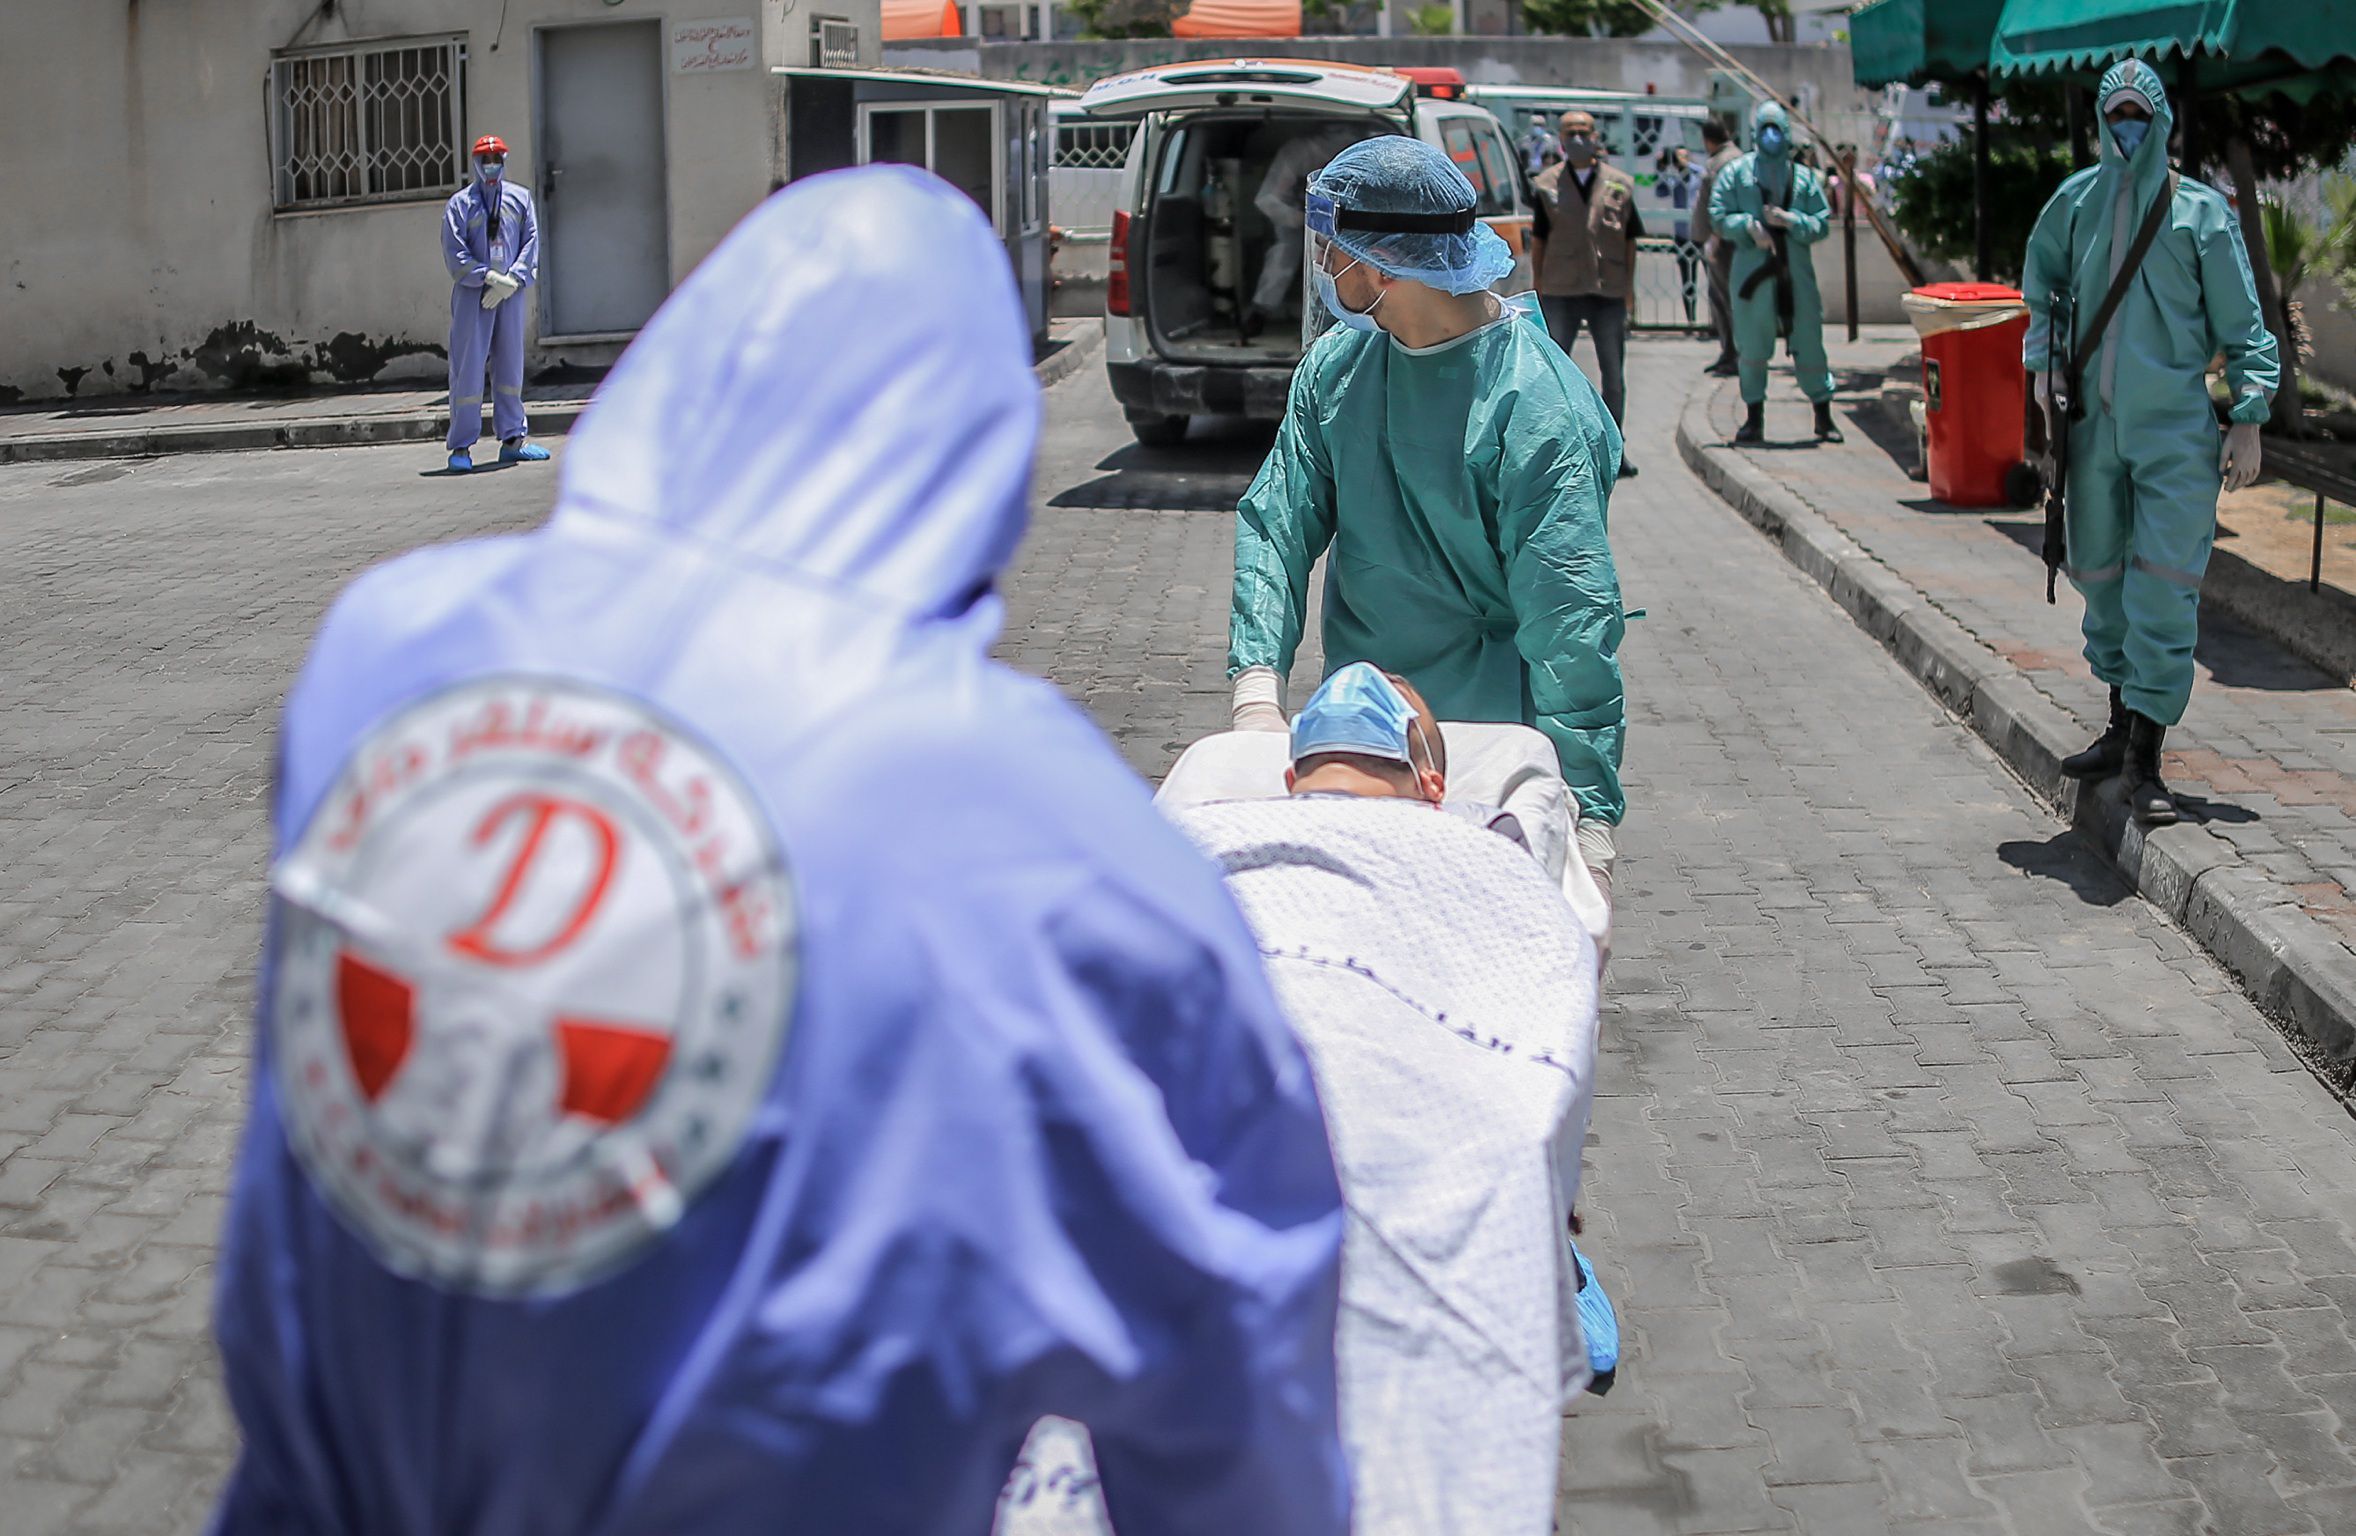 18/07/2020 18 July 2020, Palestinian Territories, Gaza: Members of the Ministry of Interior and Health at Gaza city transport a man during an exercise amid the spread of the coronavirus (COVID-19) pandemic. Photo: Abed Alrahman Alkahlout/Quds Net News via ZUMA Wire/dpa
POLITICA INTERNACIONAL
Abed Alrahman Alkahlout/Quds Net / DPA
